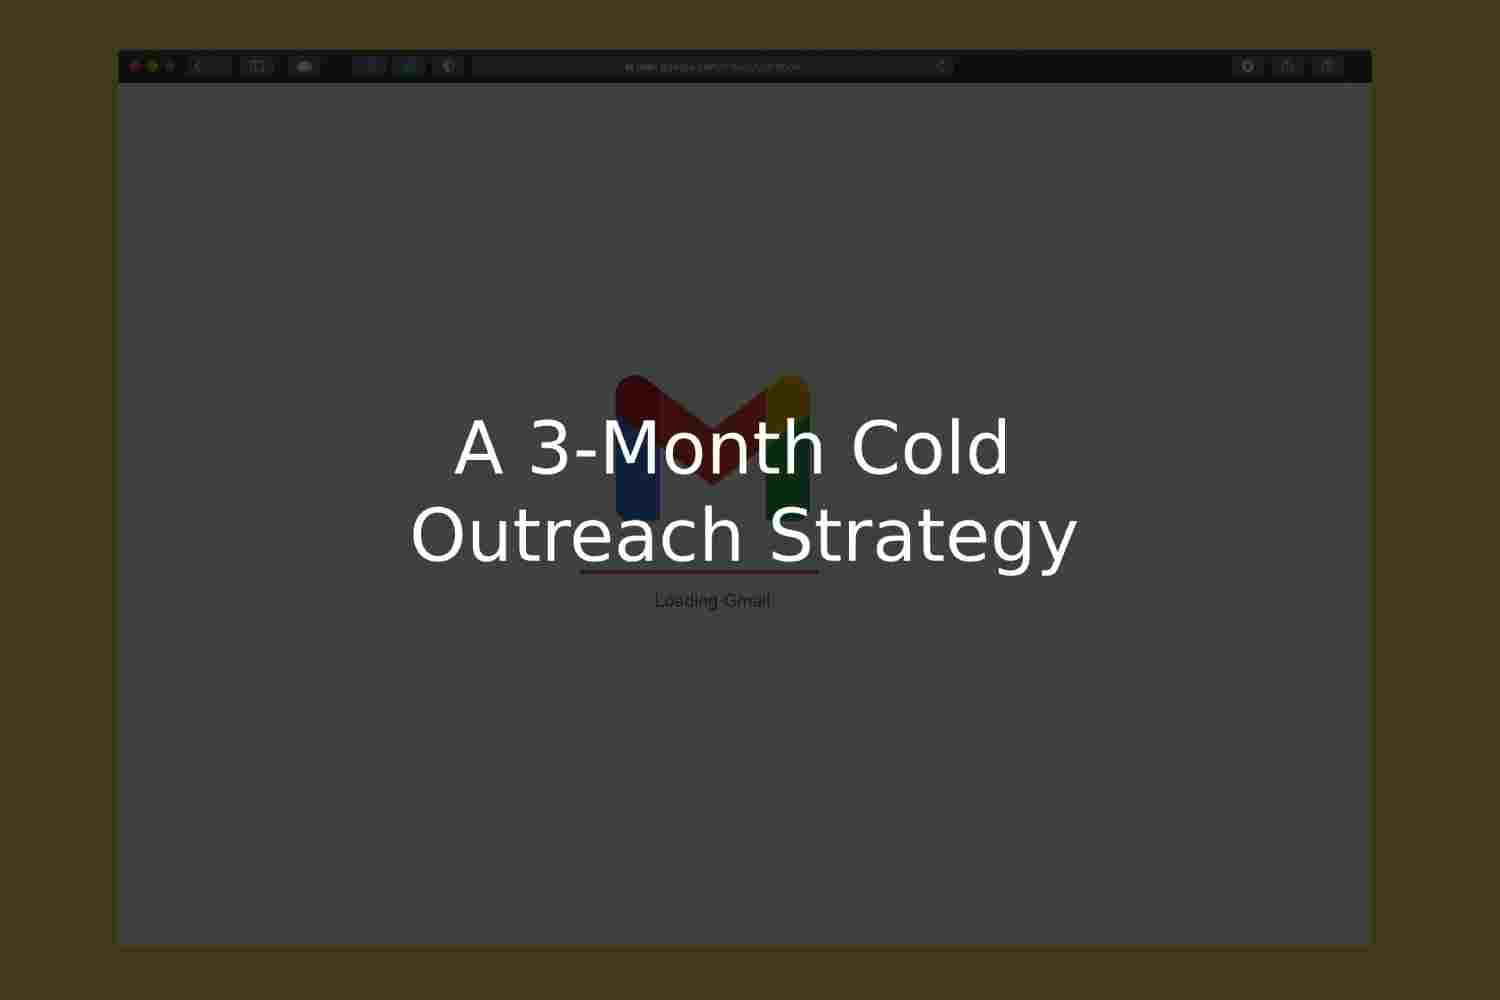 A 3-month Cold Outreach Strategy